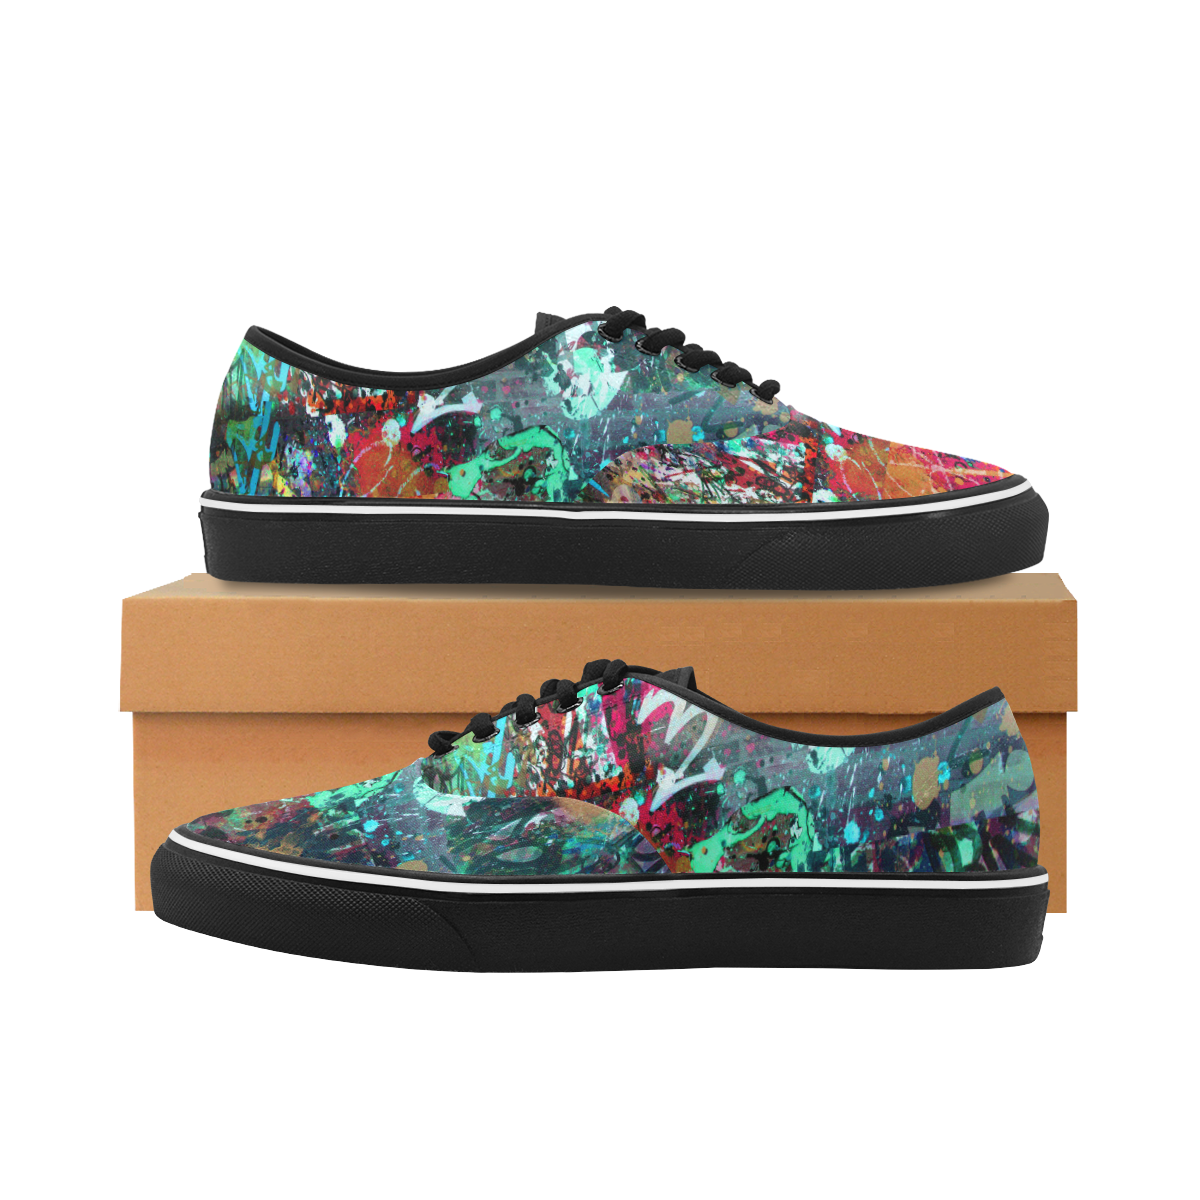 Graffiti Wall and Paint Splatter Classic Women's Canvas Low Top Shoes (Model E001-4)